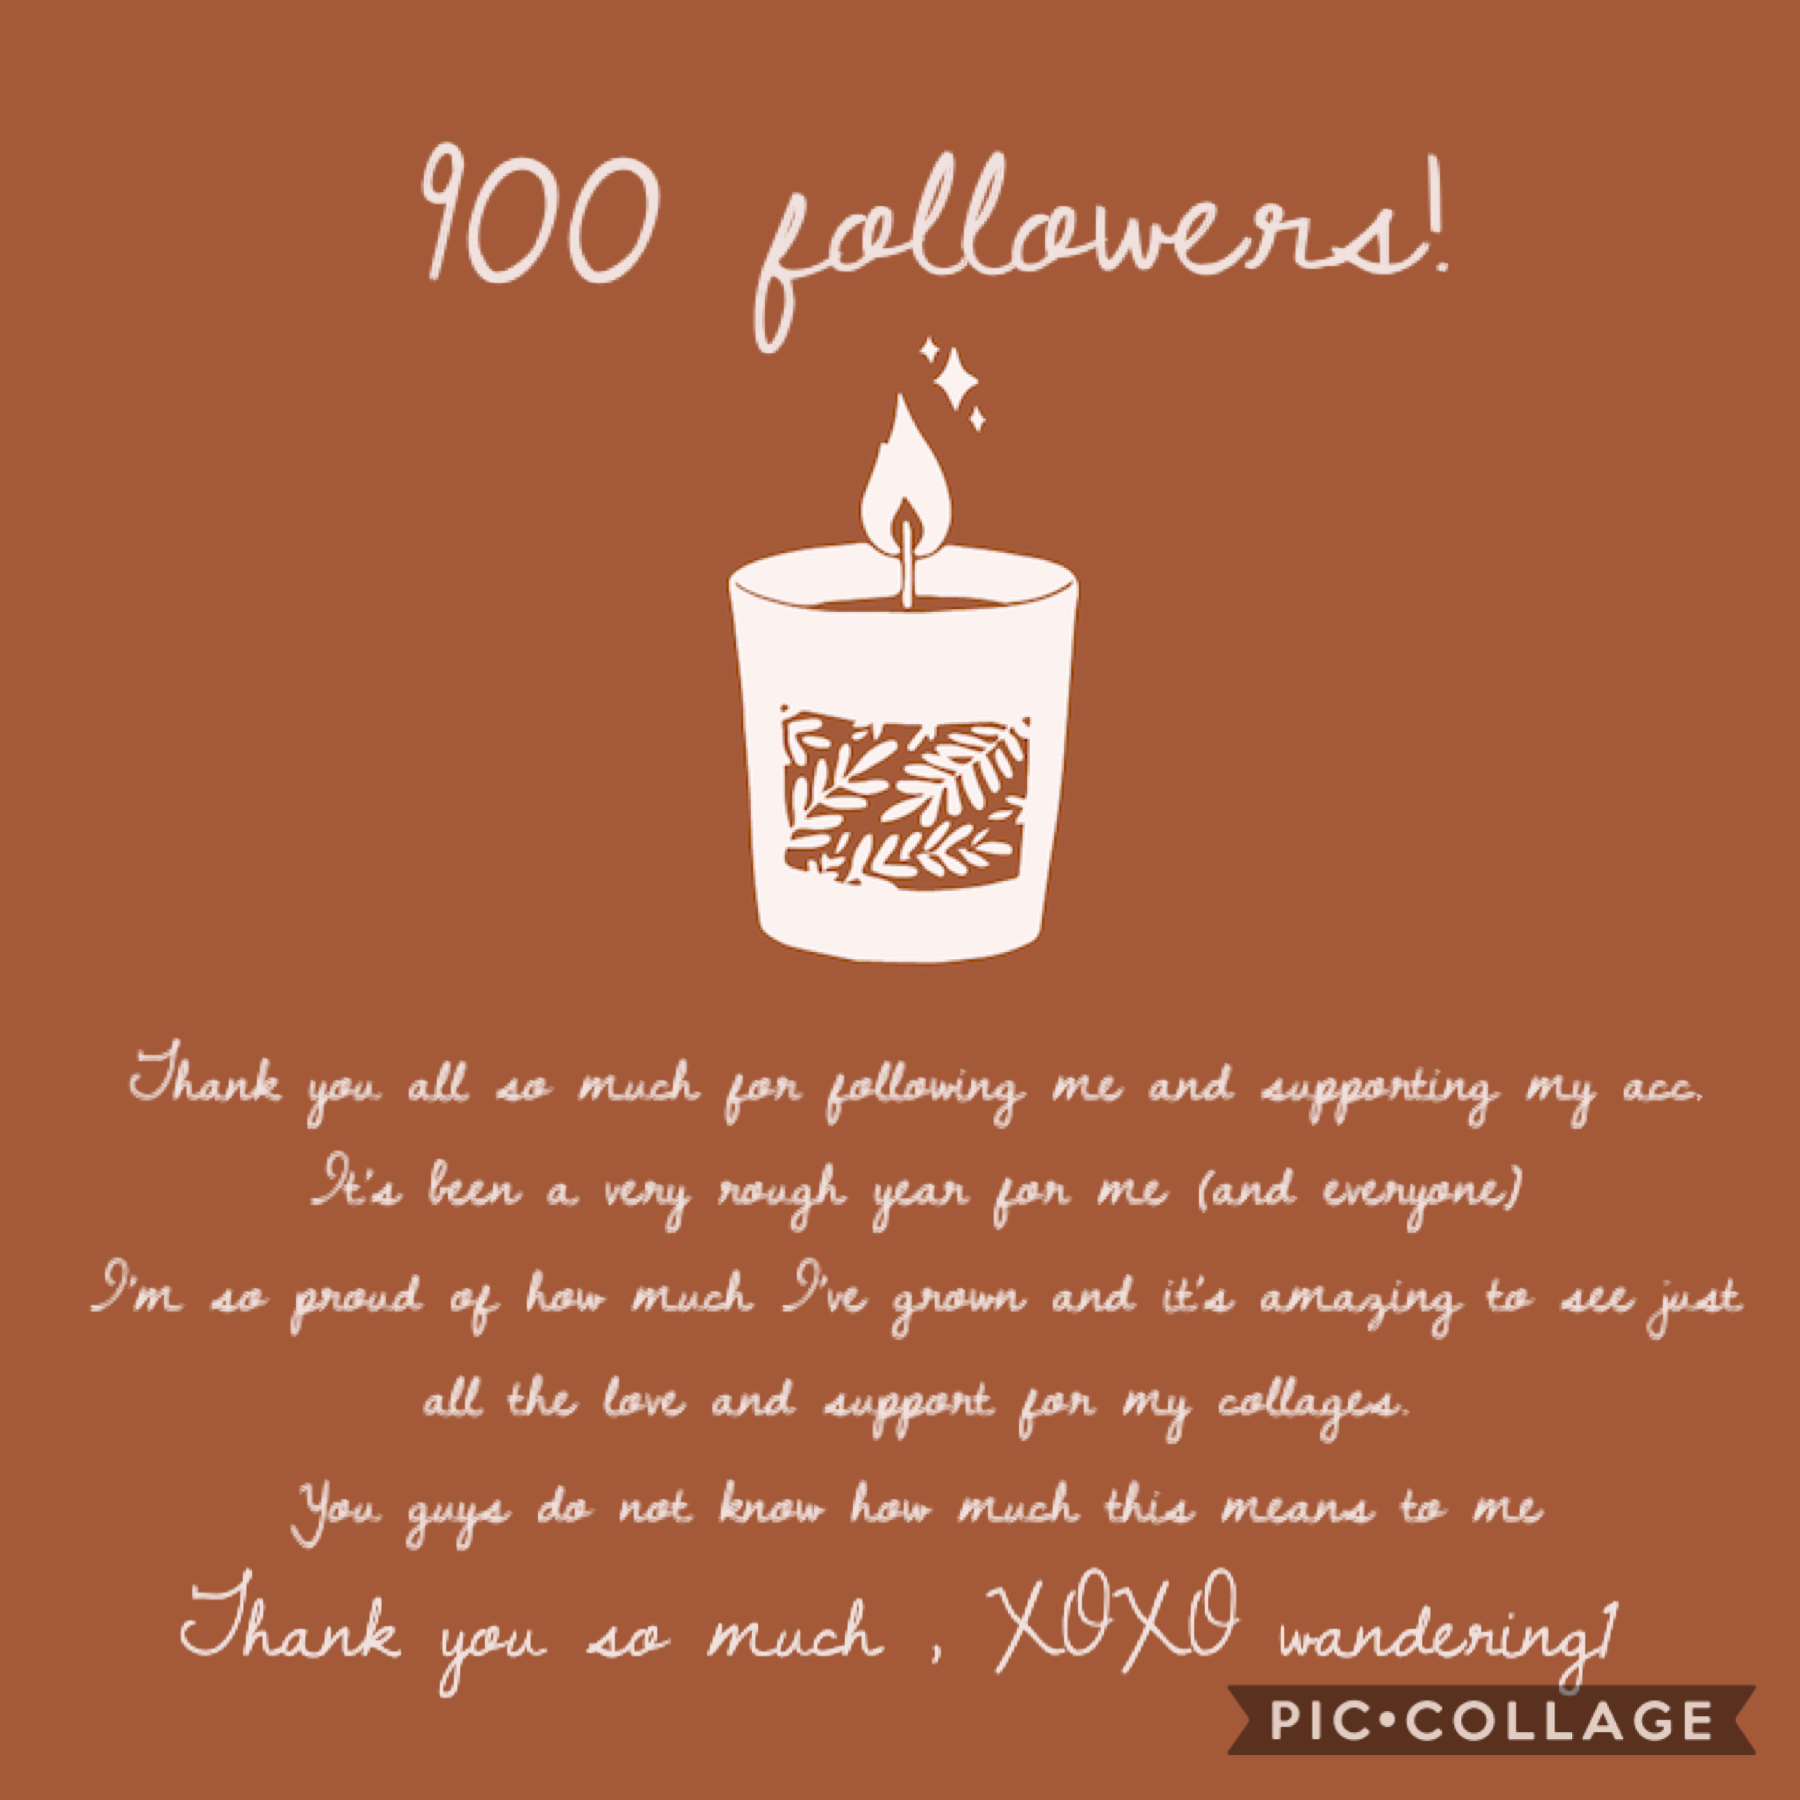 🍂Thank you all so much 🍂
💗🥺💗